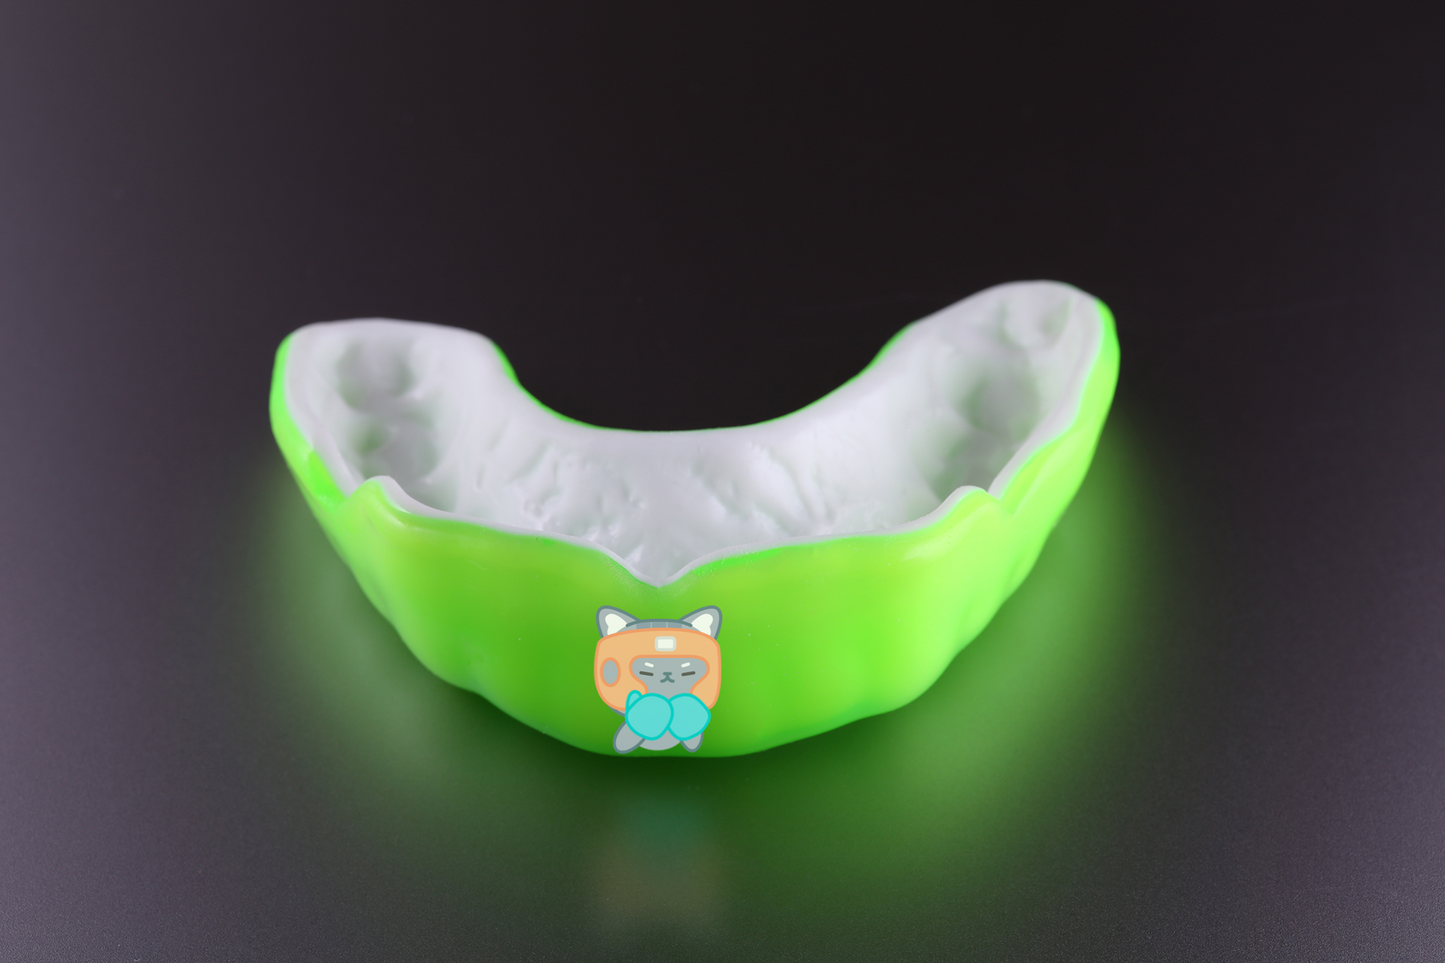 Sports Mouth Guard with individual design